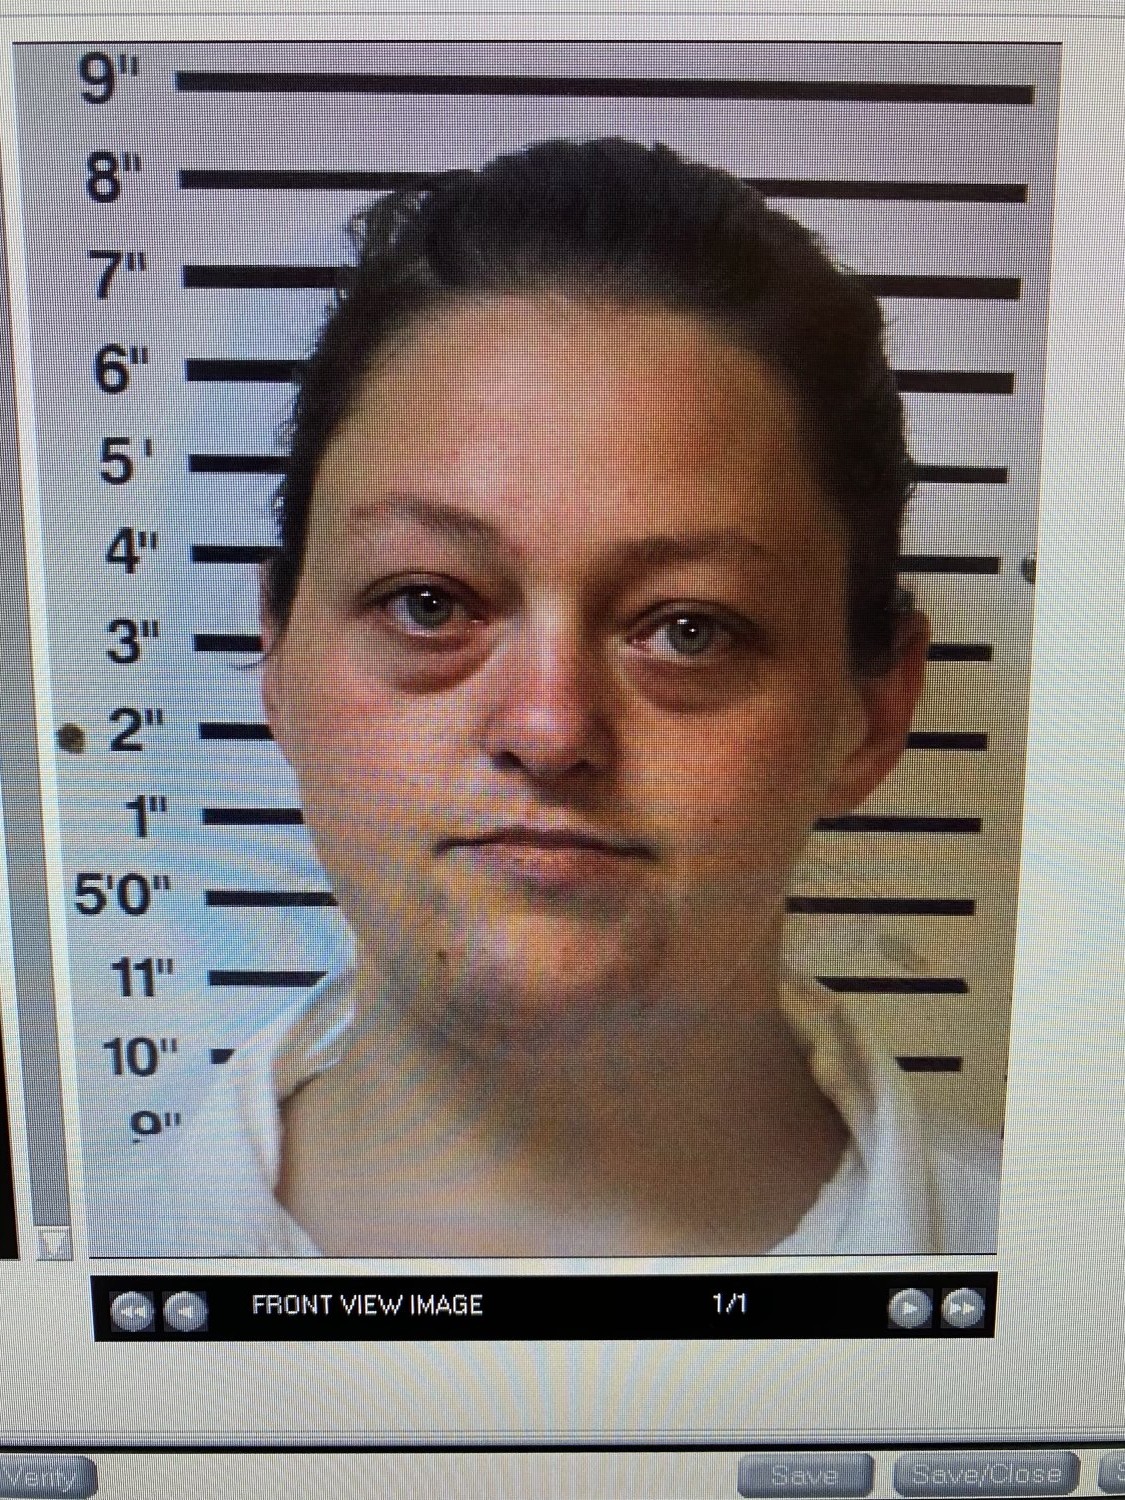 Woman Arrested for Tossing Contraband Over Wall at Macon County Jail